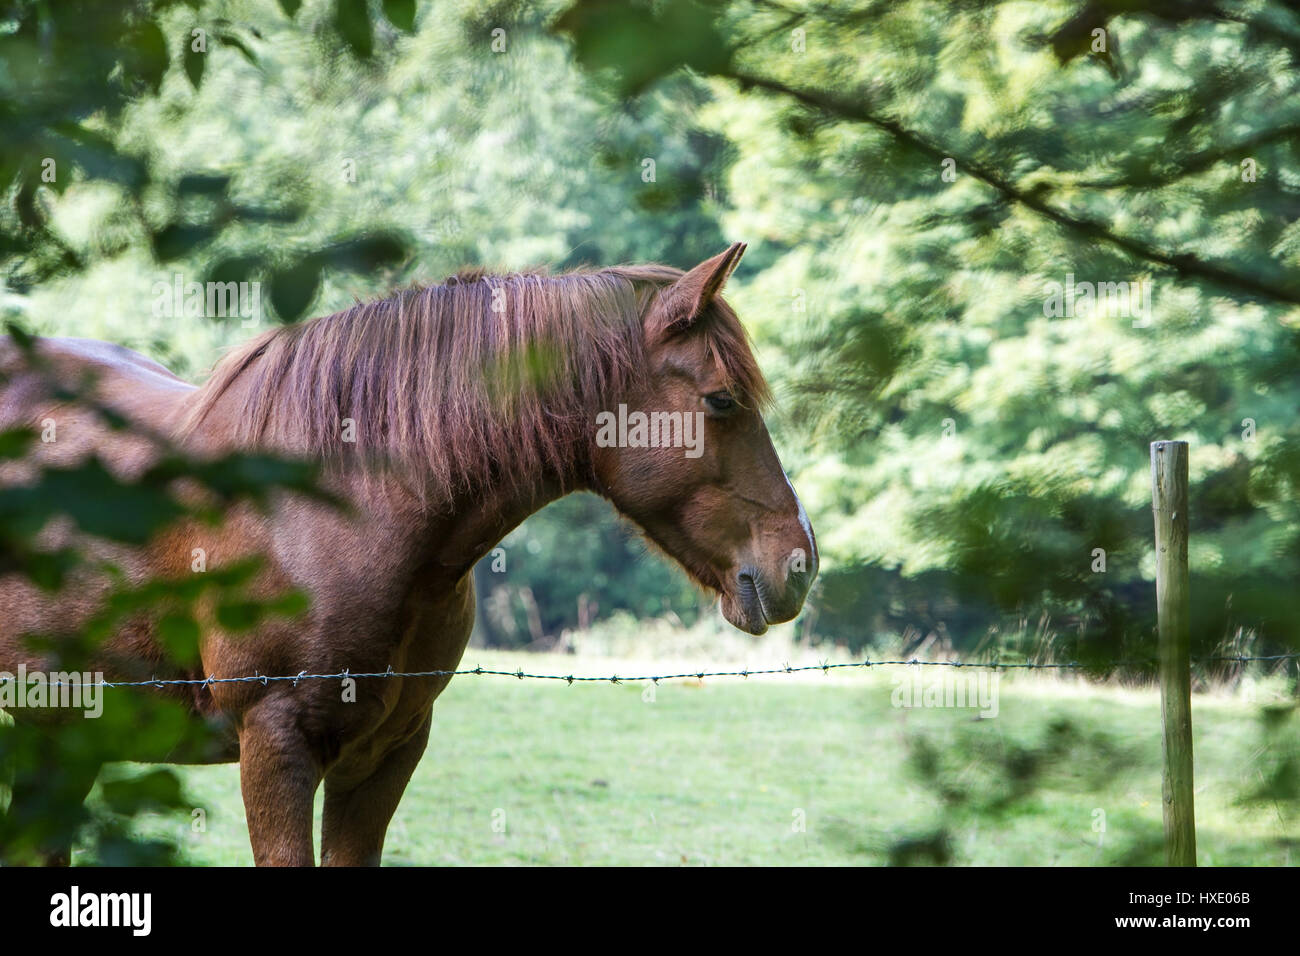 A chestnut coloured horse standing by a barbed wire fence, surrounded by green trees. Stock Photo